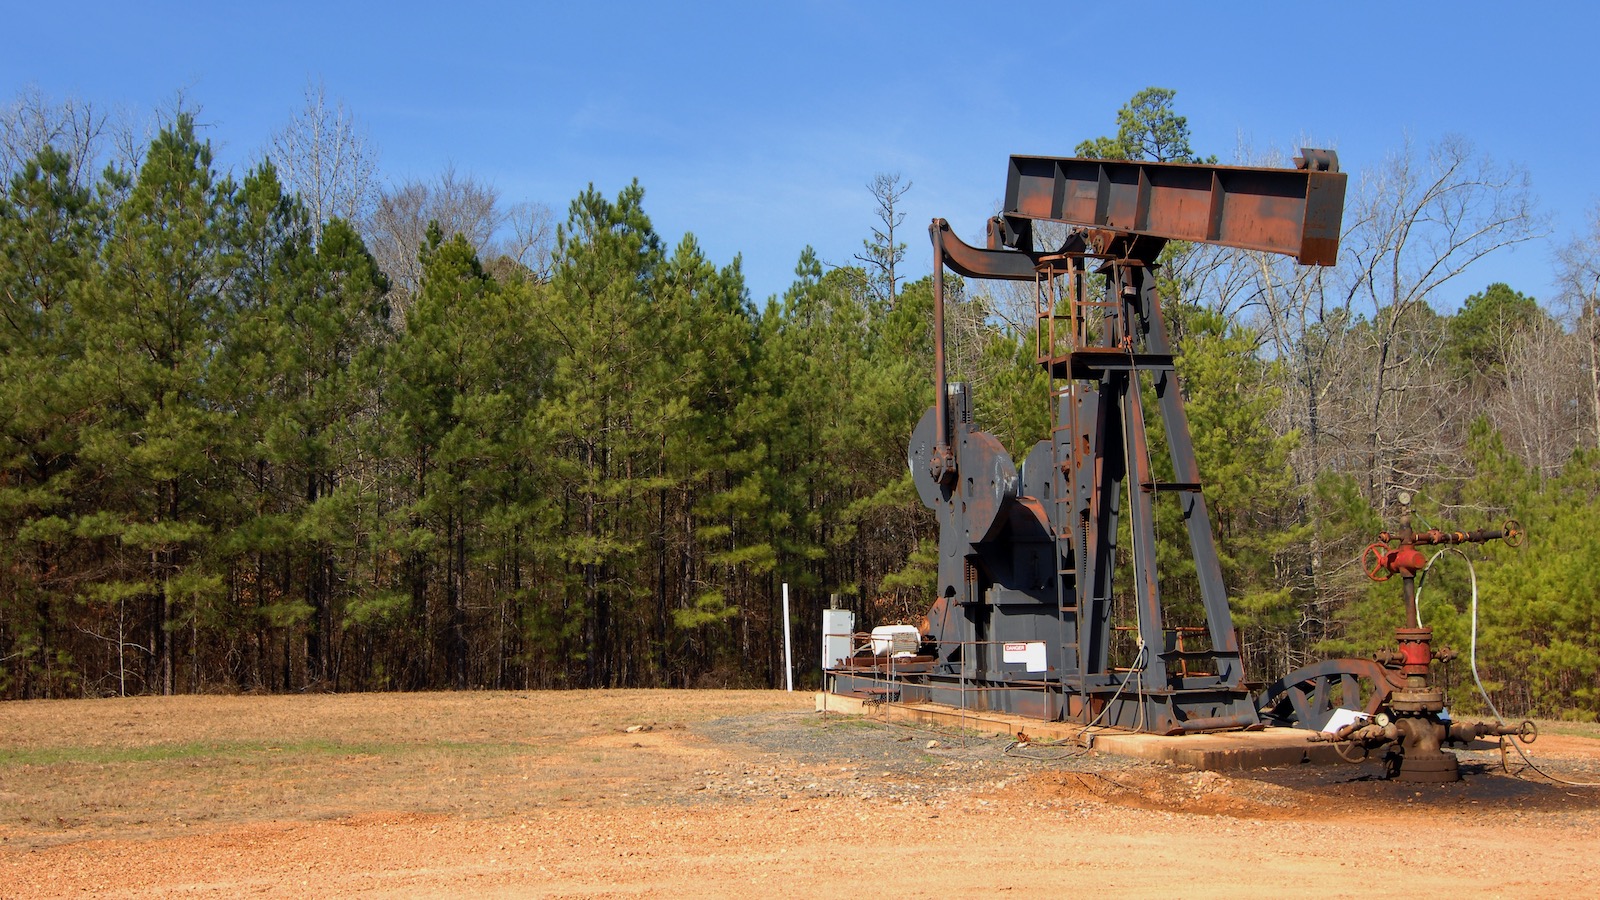 An oil well sits idle surrounded by pine trees and blue sky in rural Arkansas.